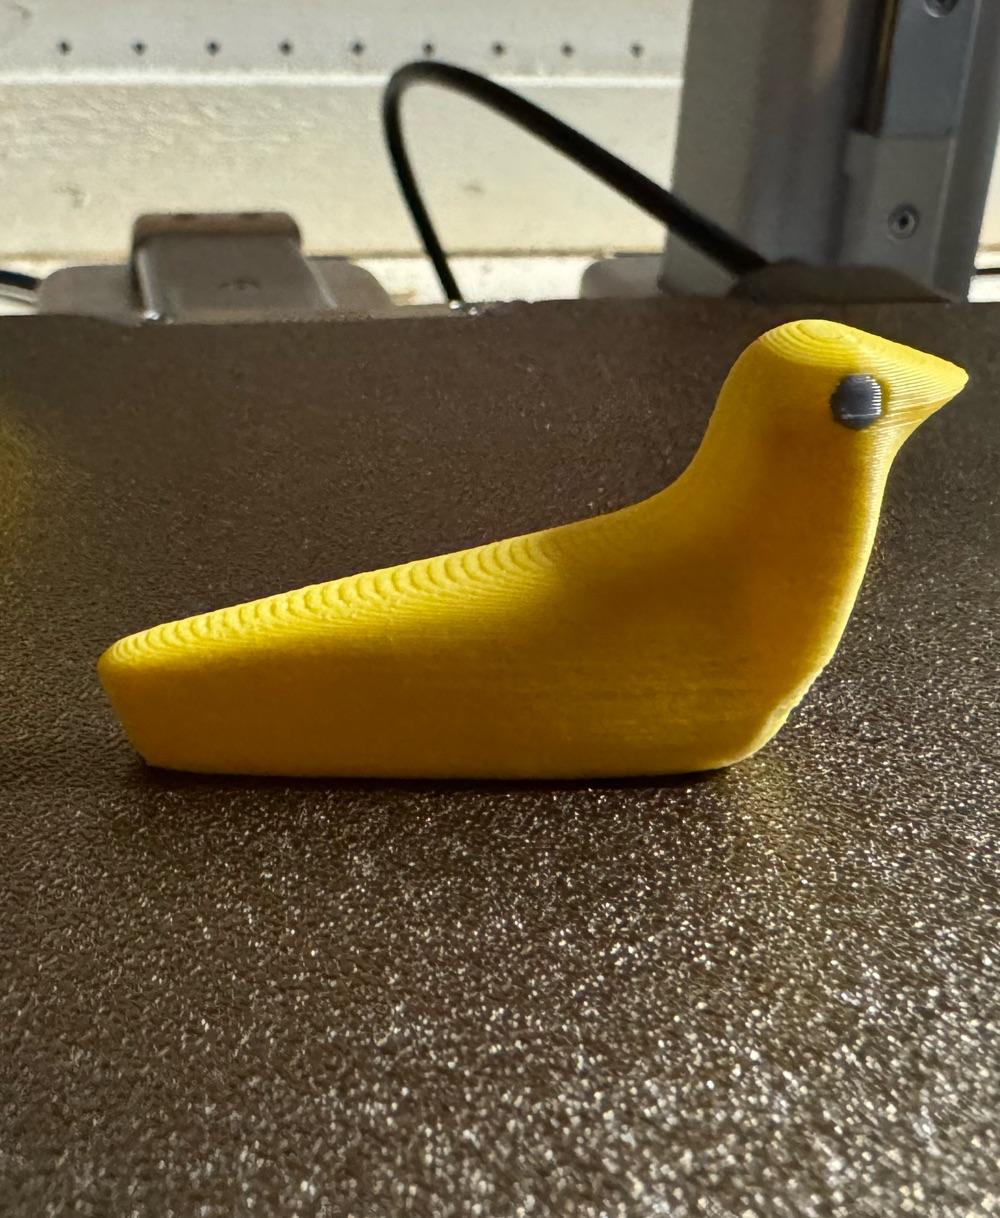 Minimalist Bird Sculptures - Printed first try. .2 layers, no supports  - 3d model